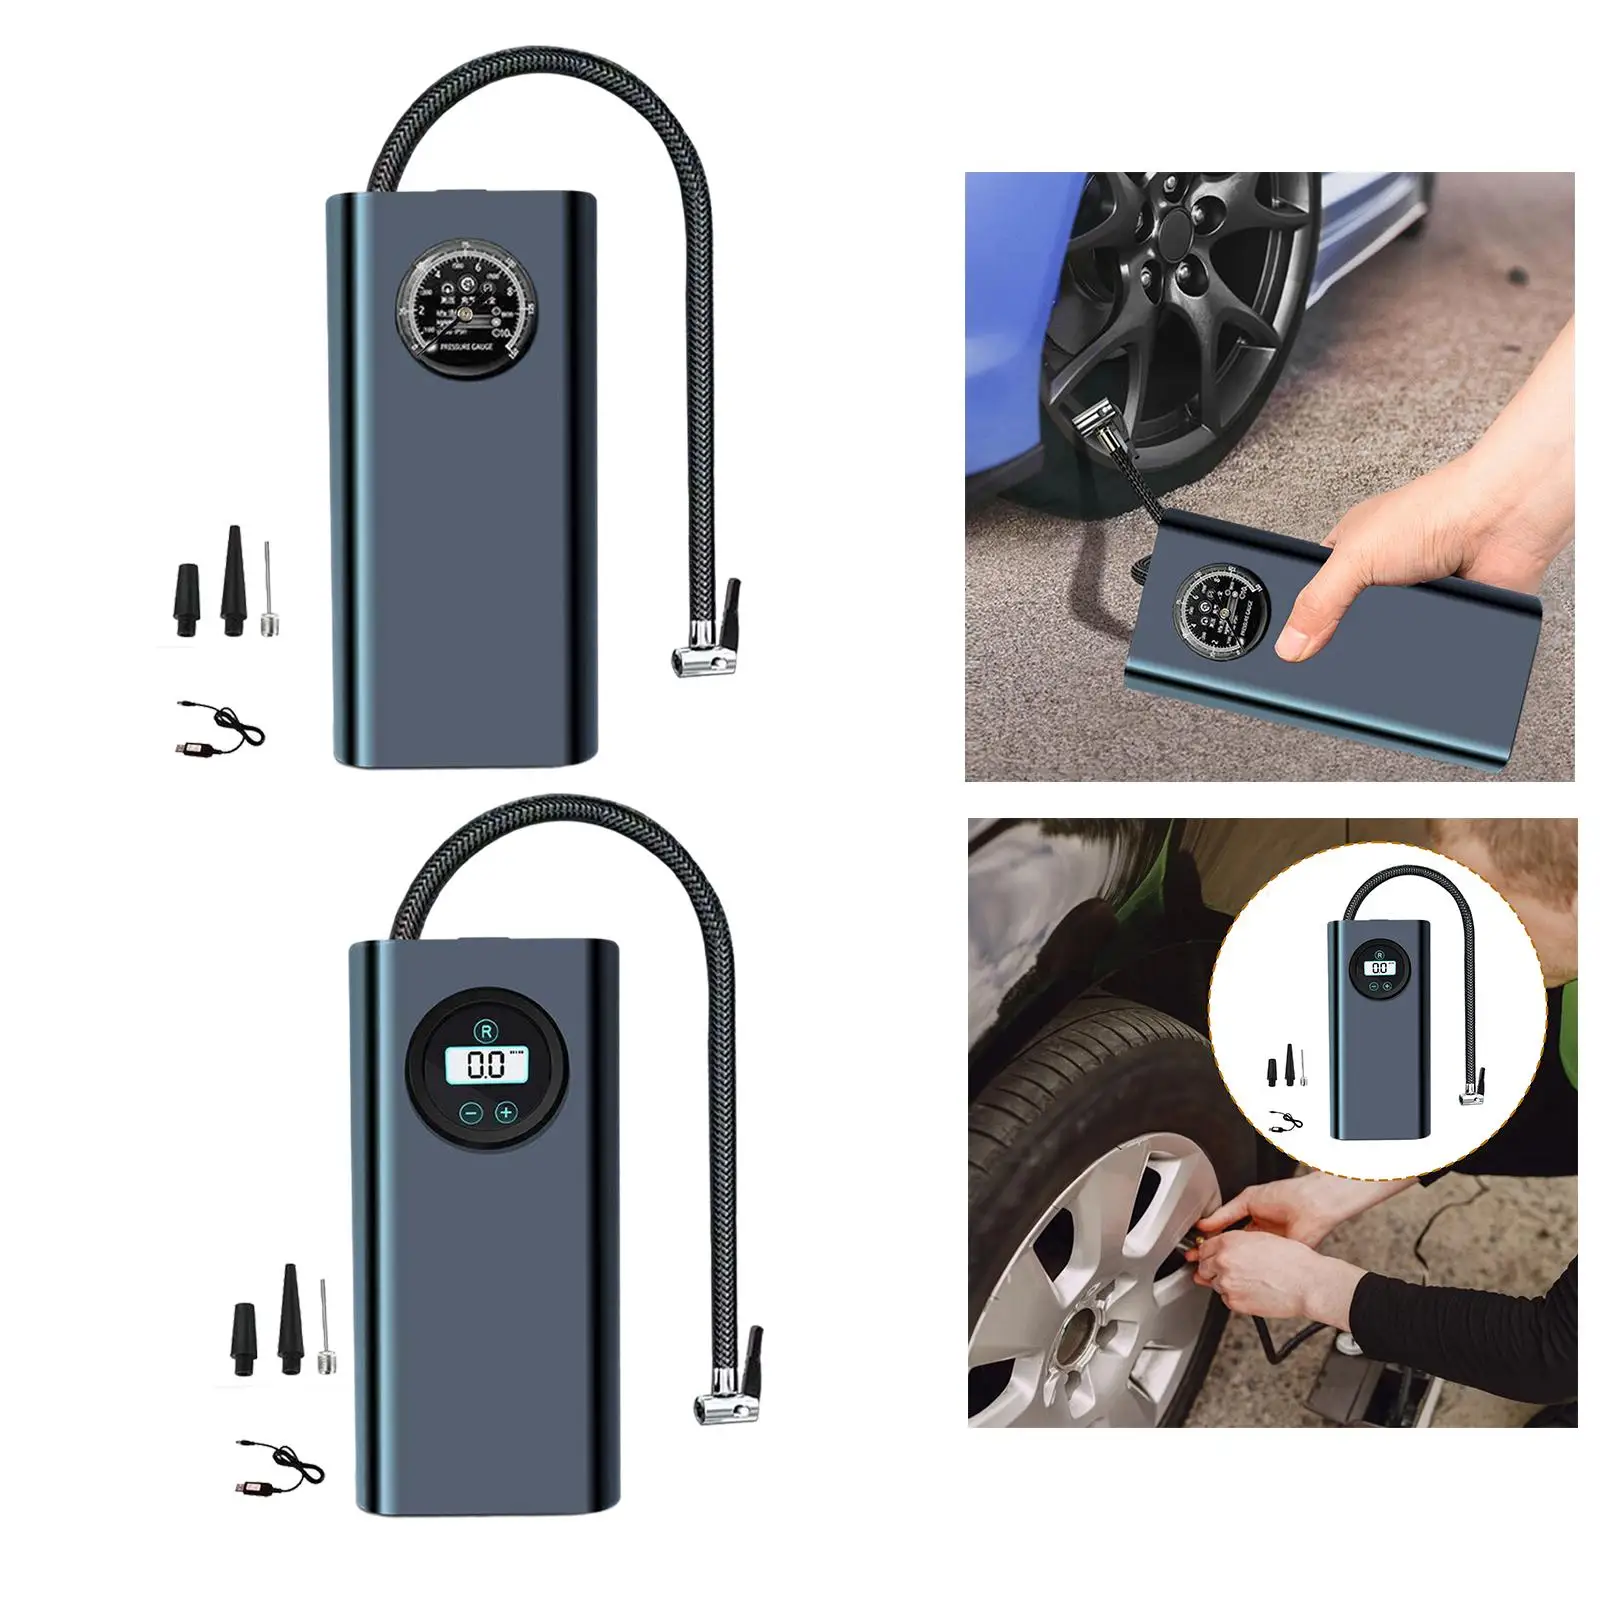 Tire Inflator Portable Compact Pump Auto Accessories Portable Air Compressor Tire Pump for Trucks SUV Motorcycle Bike Cars